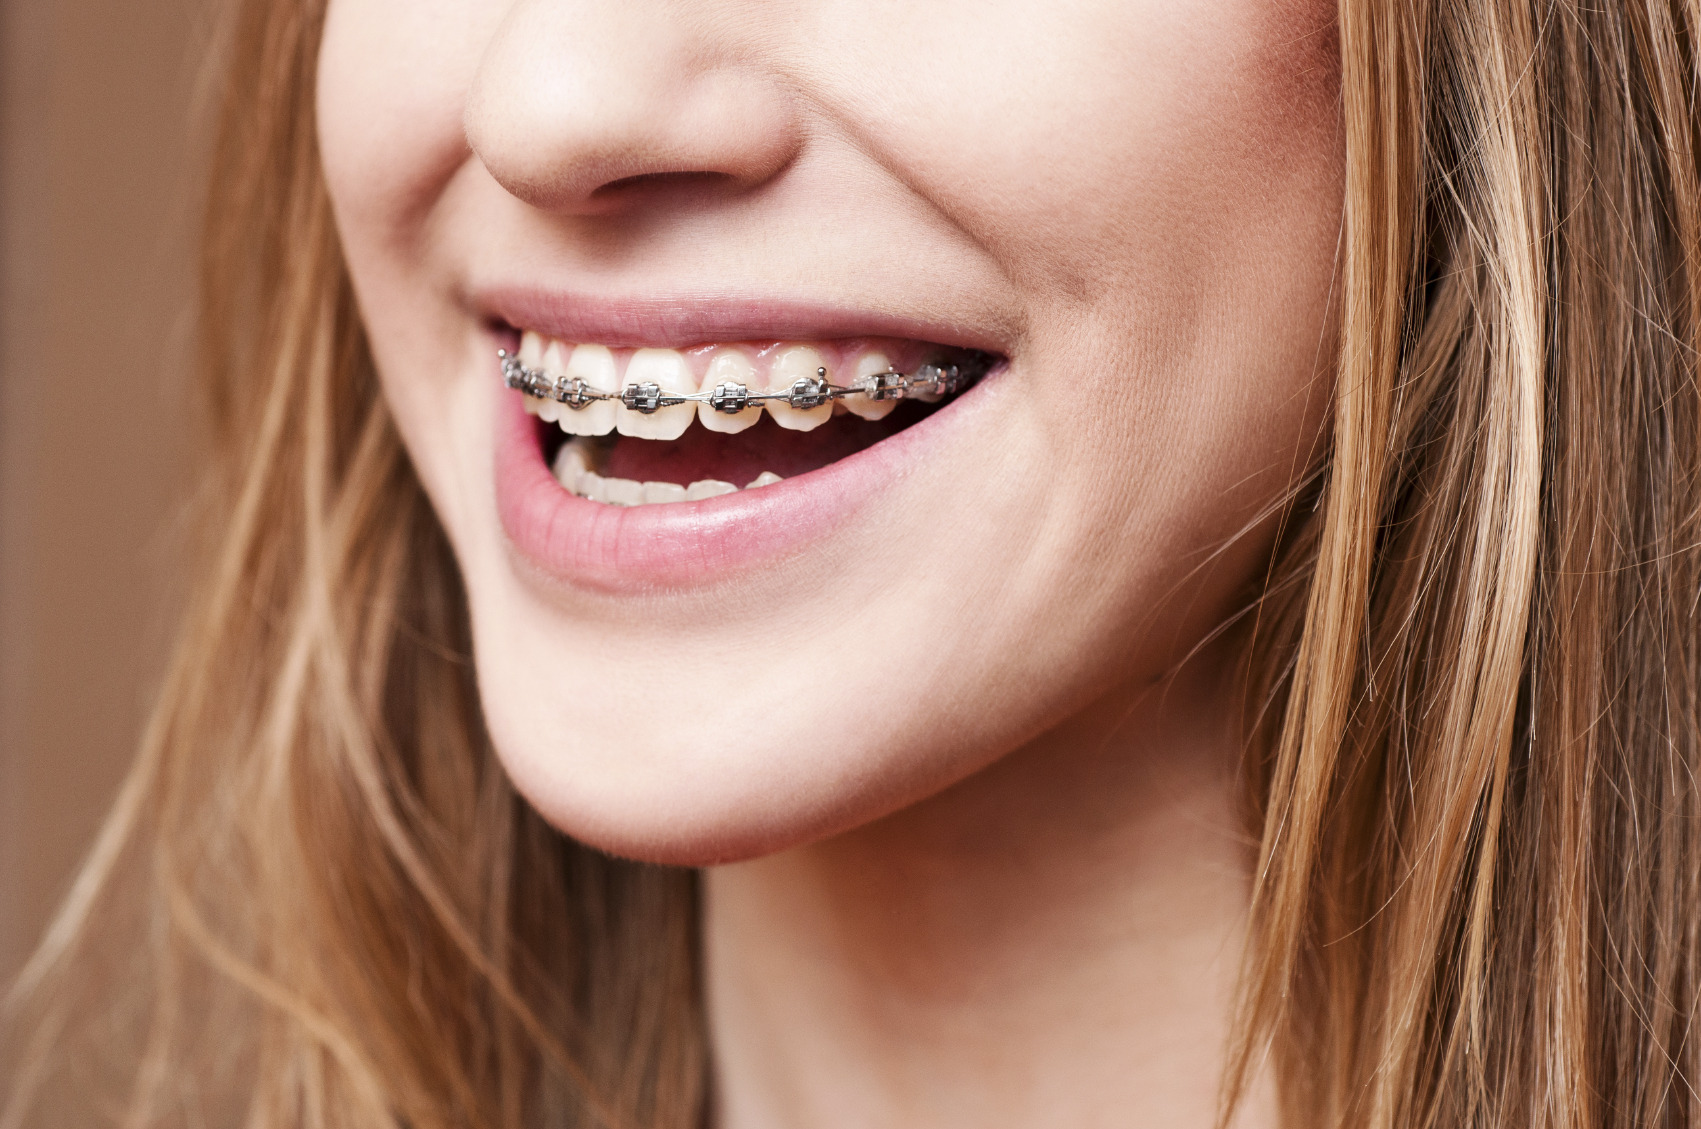 Easy Steps for a Successful Orthodontic Treatment